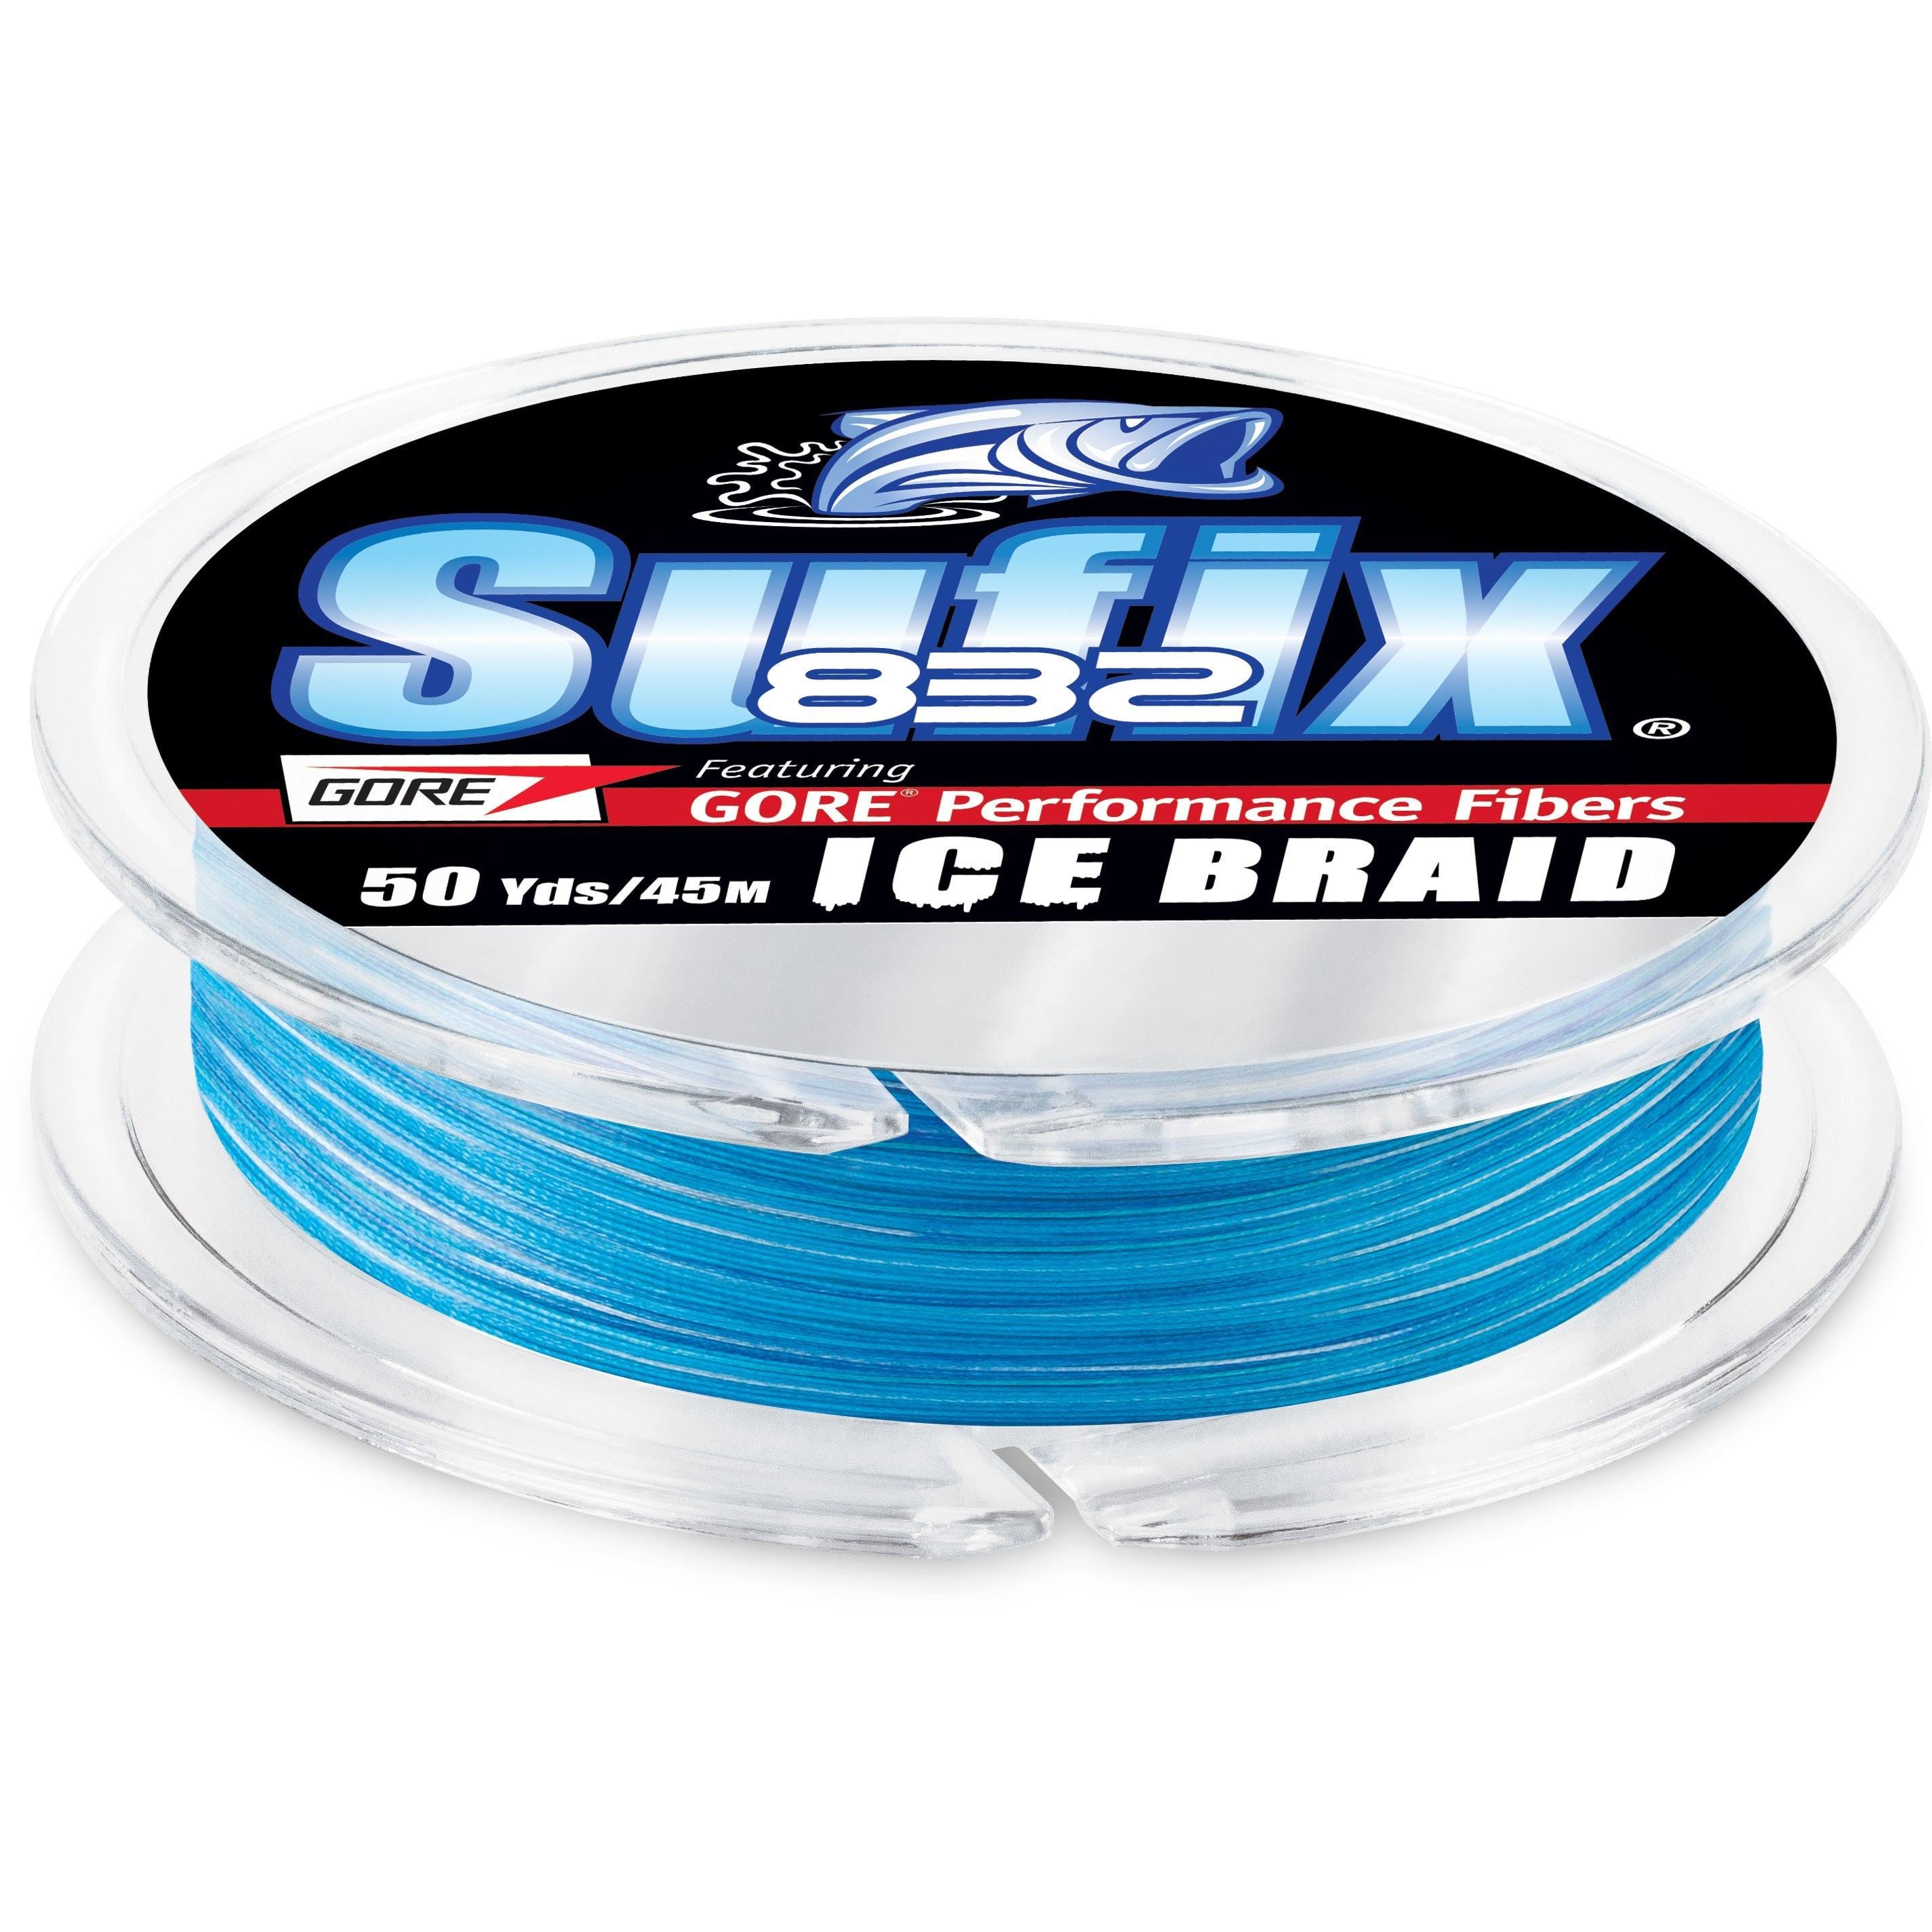 Pavillon Chasse et Pêche ProNature - Sufix 832 Ice Braid 50yd Ghost 08 lbs  | Pointy